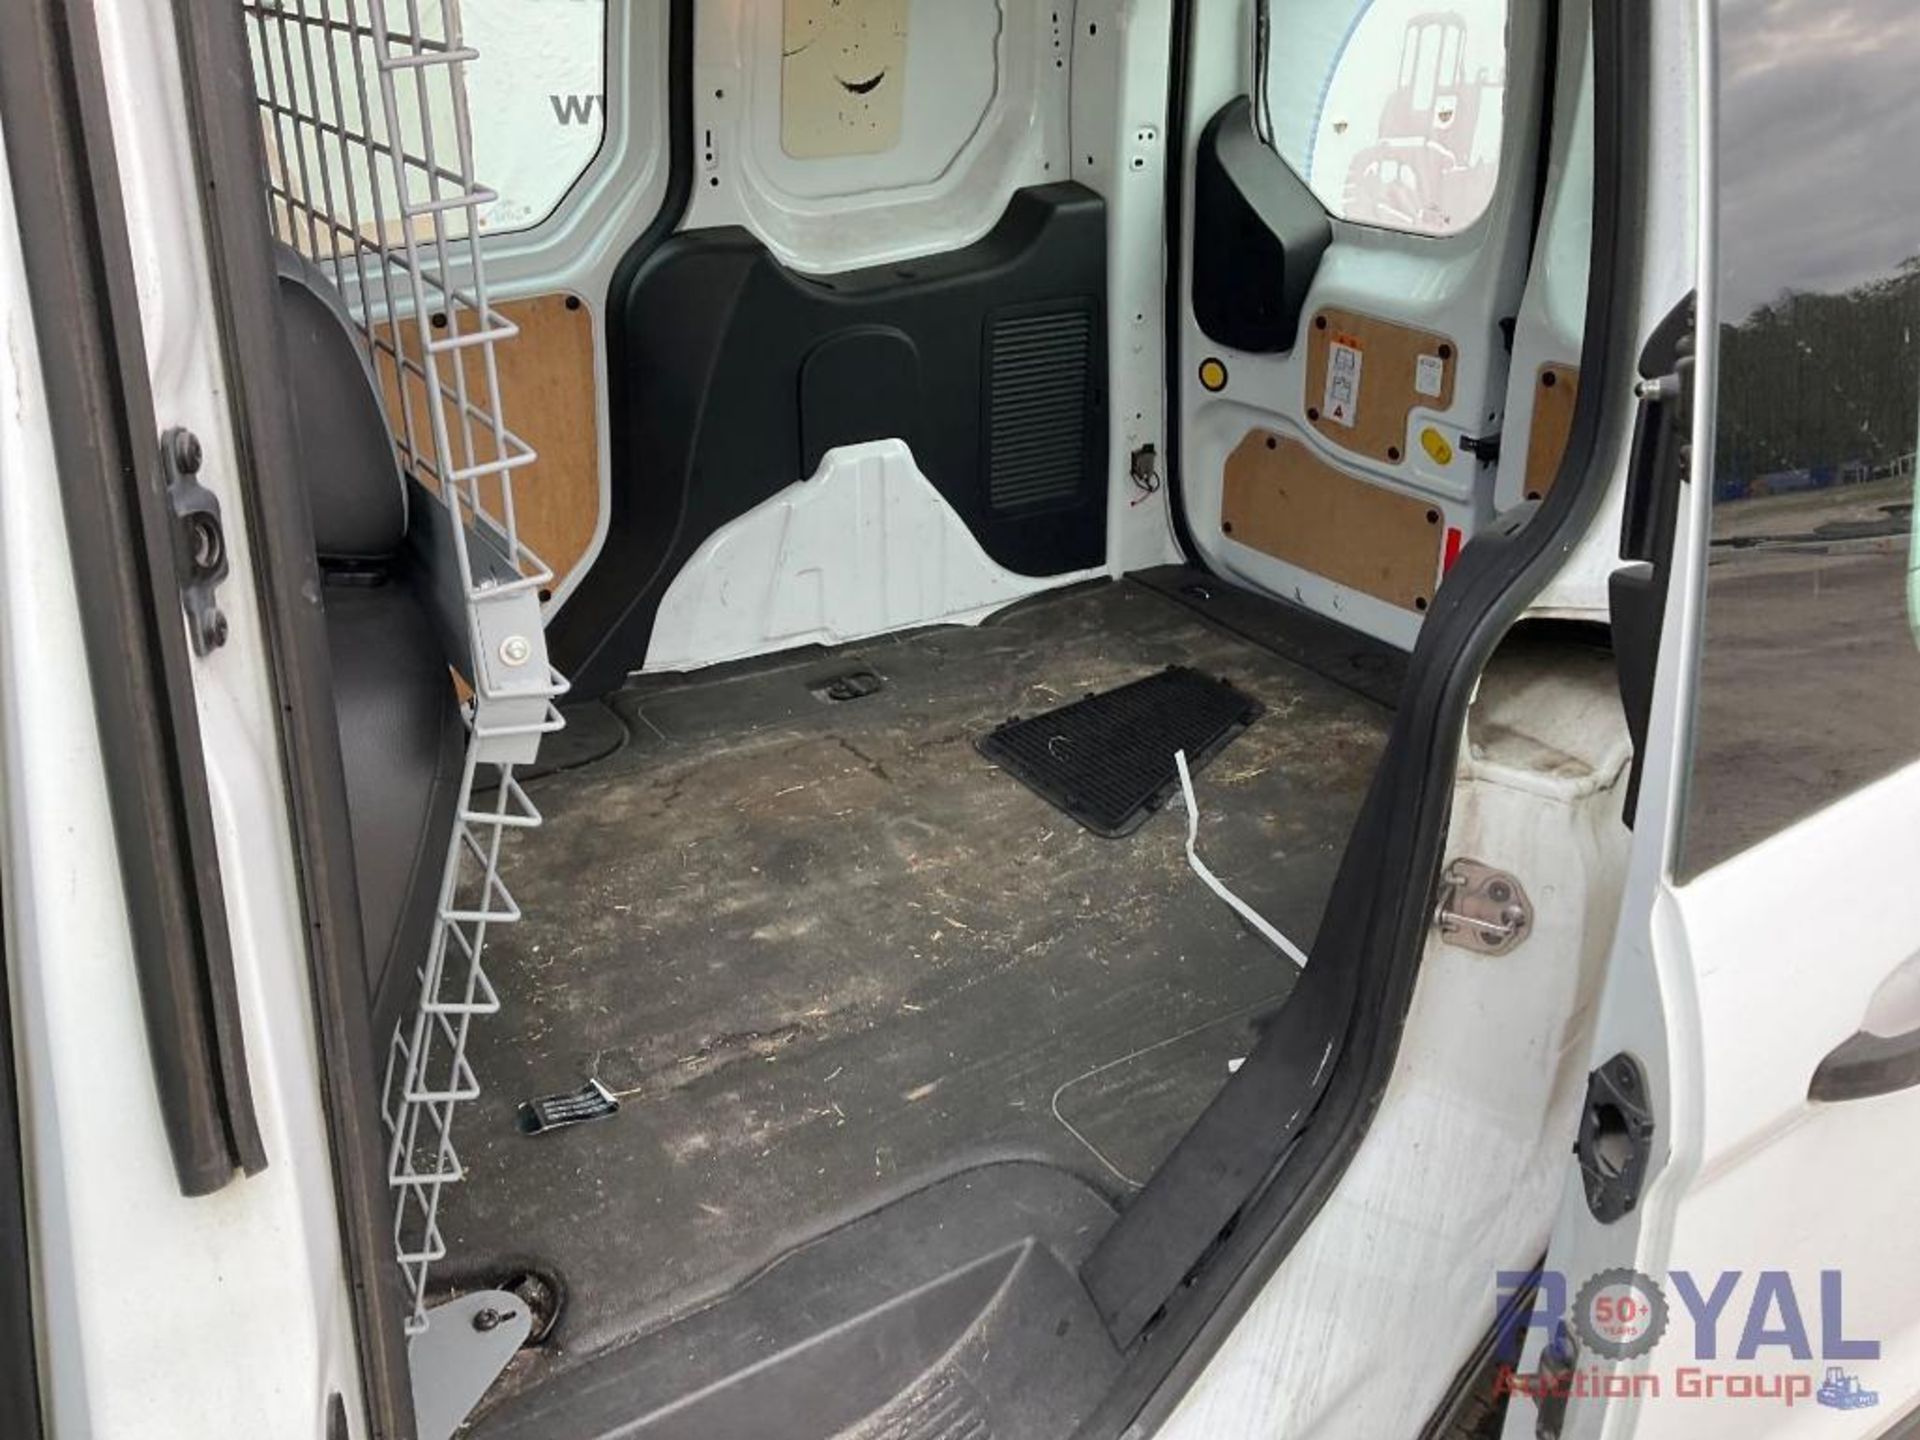 2014 Ford Transit Connect Cargo Van - Image 22 of 26